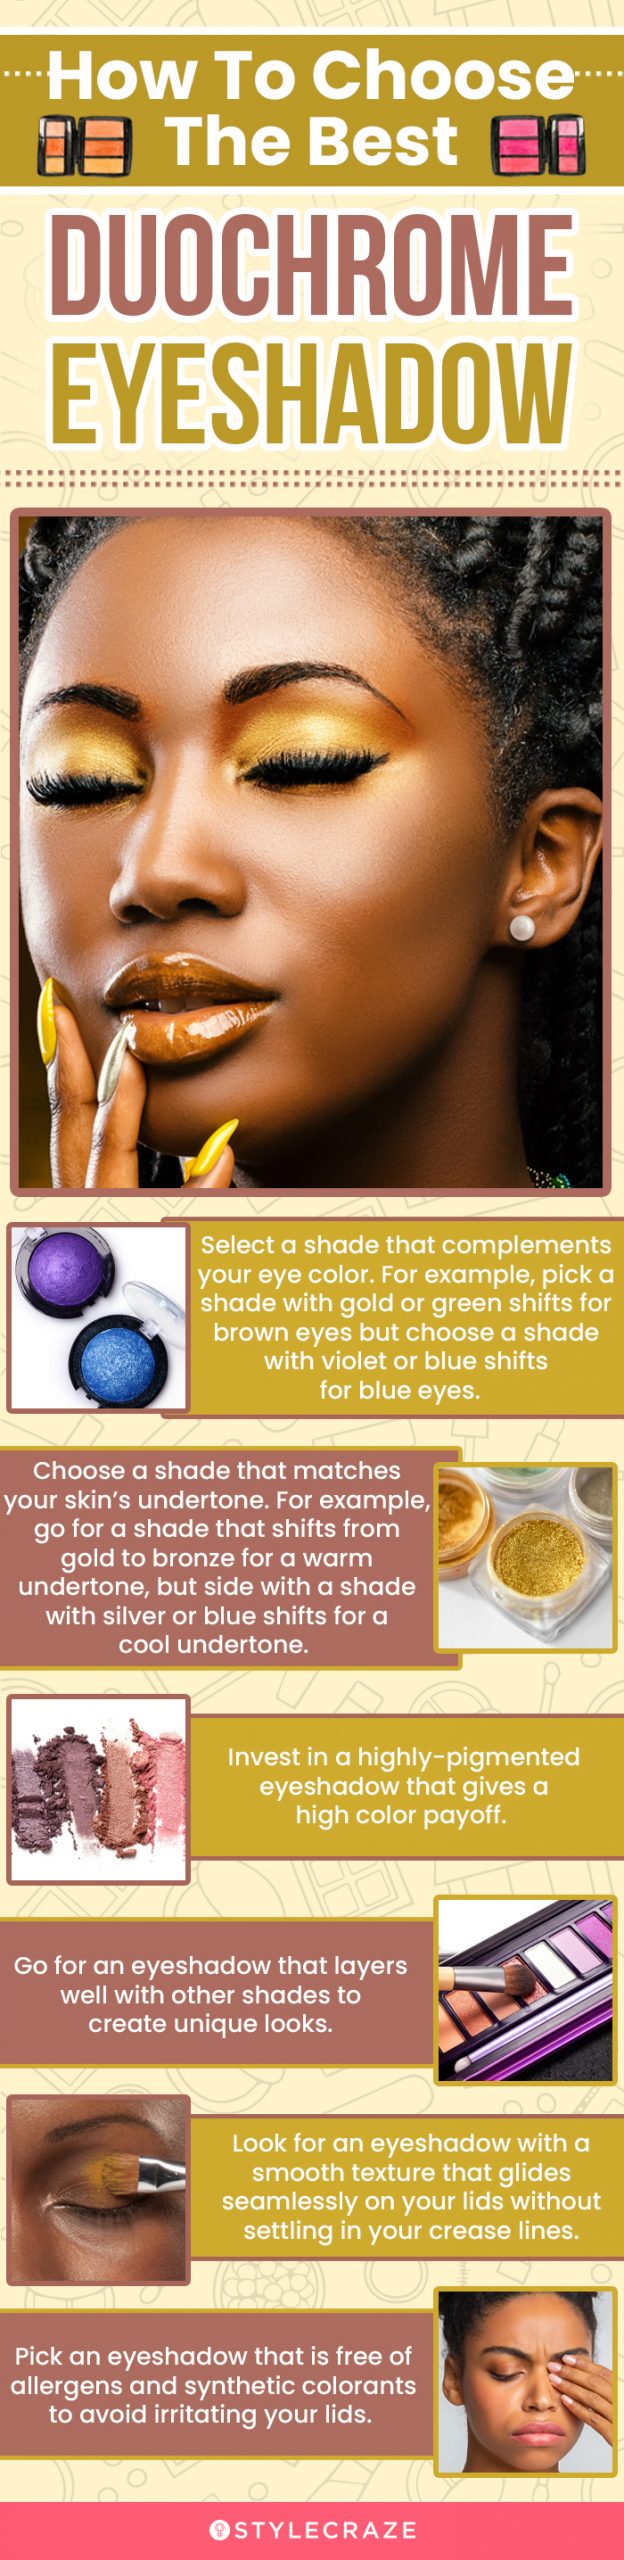 How To Choose The Best Duochrome Eyeshadow (infographic)